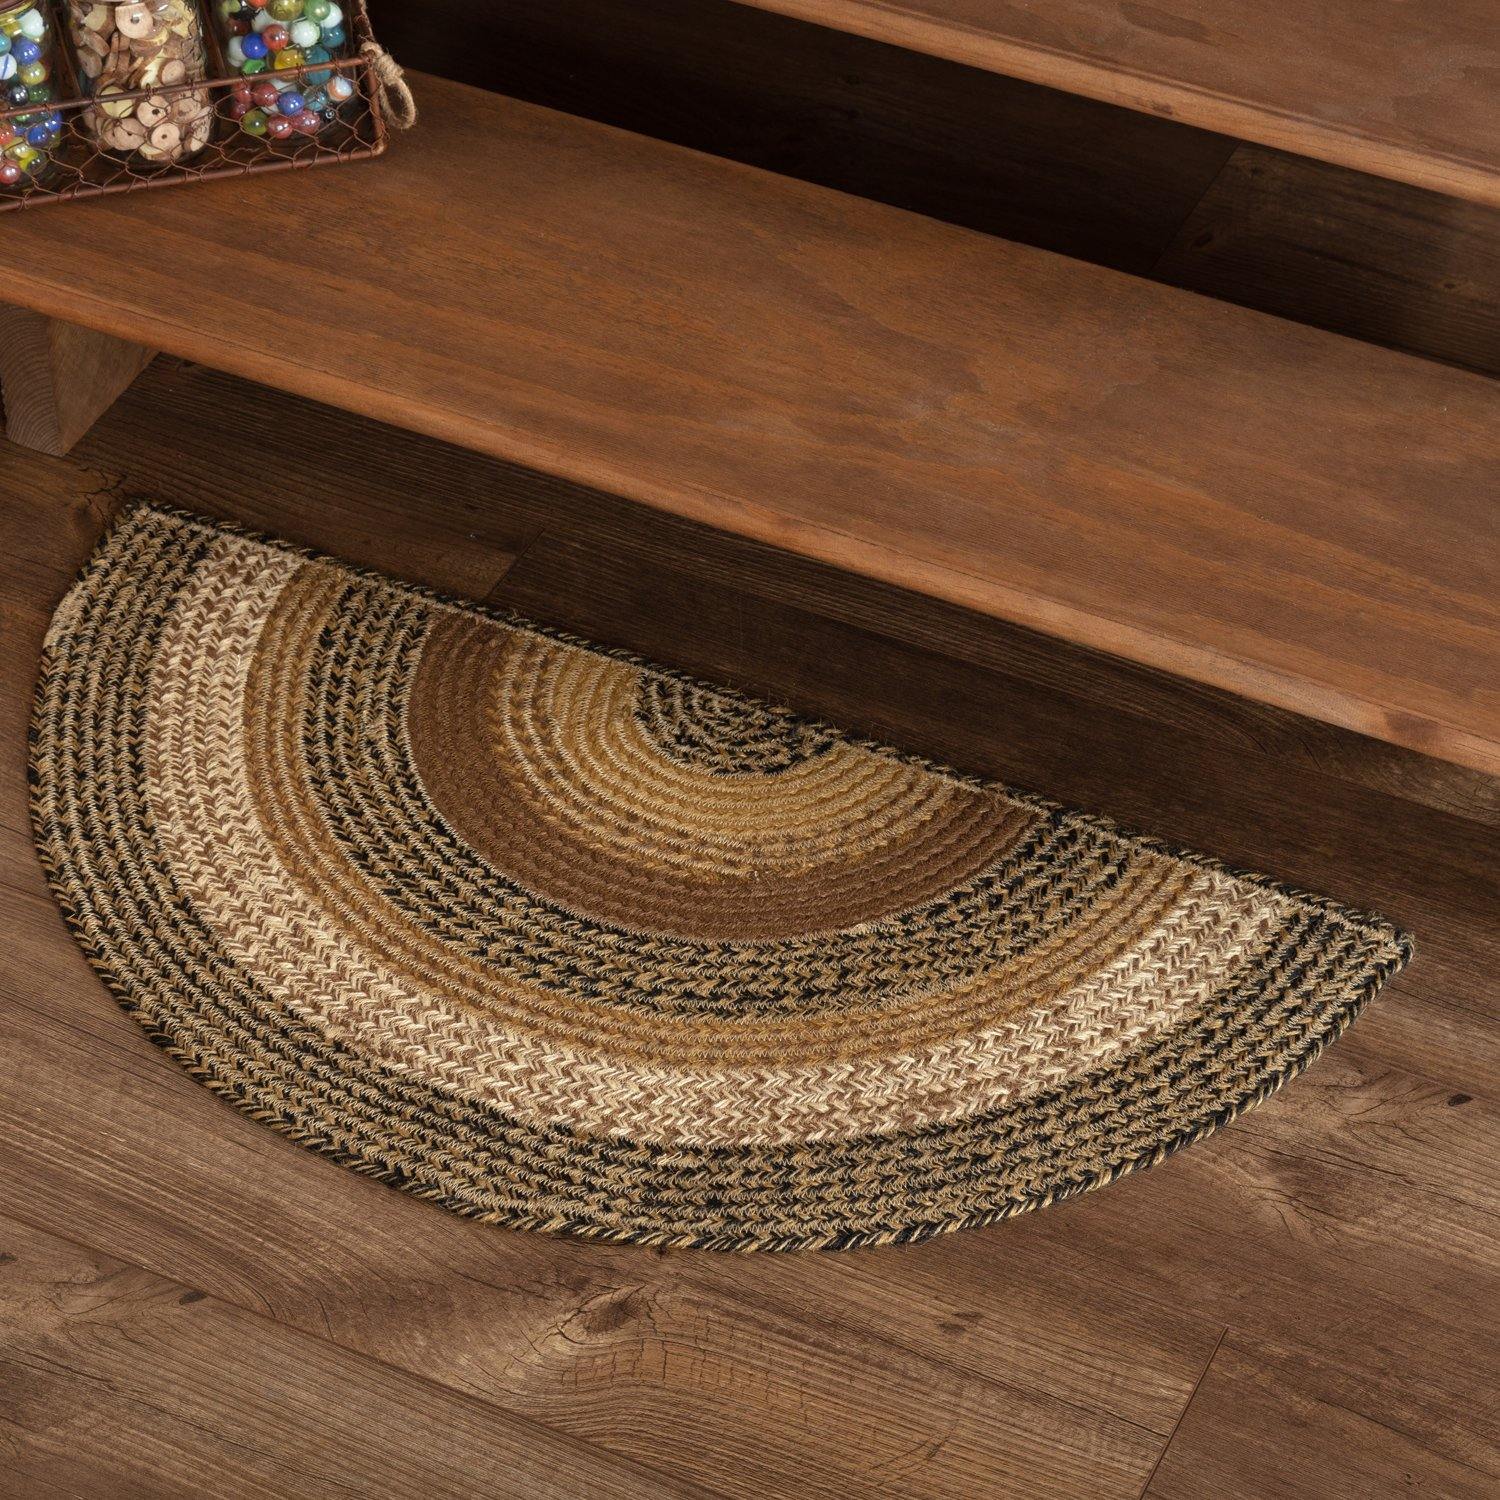 Kettle Grove Jute Braided Rug Half Circle 16.5"x33" with Rug Pad VHC Brands - The Fox Decor